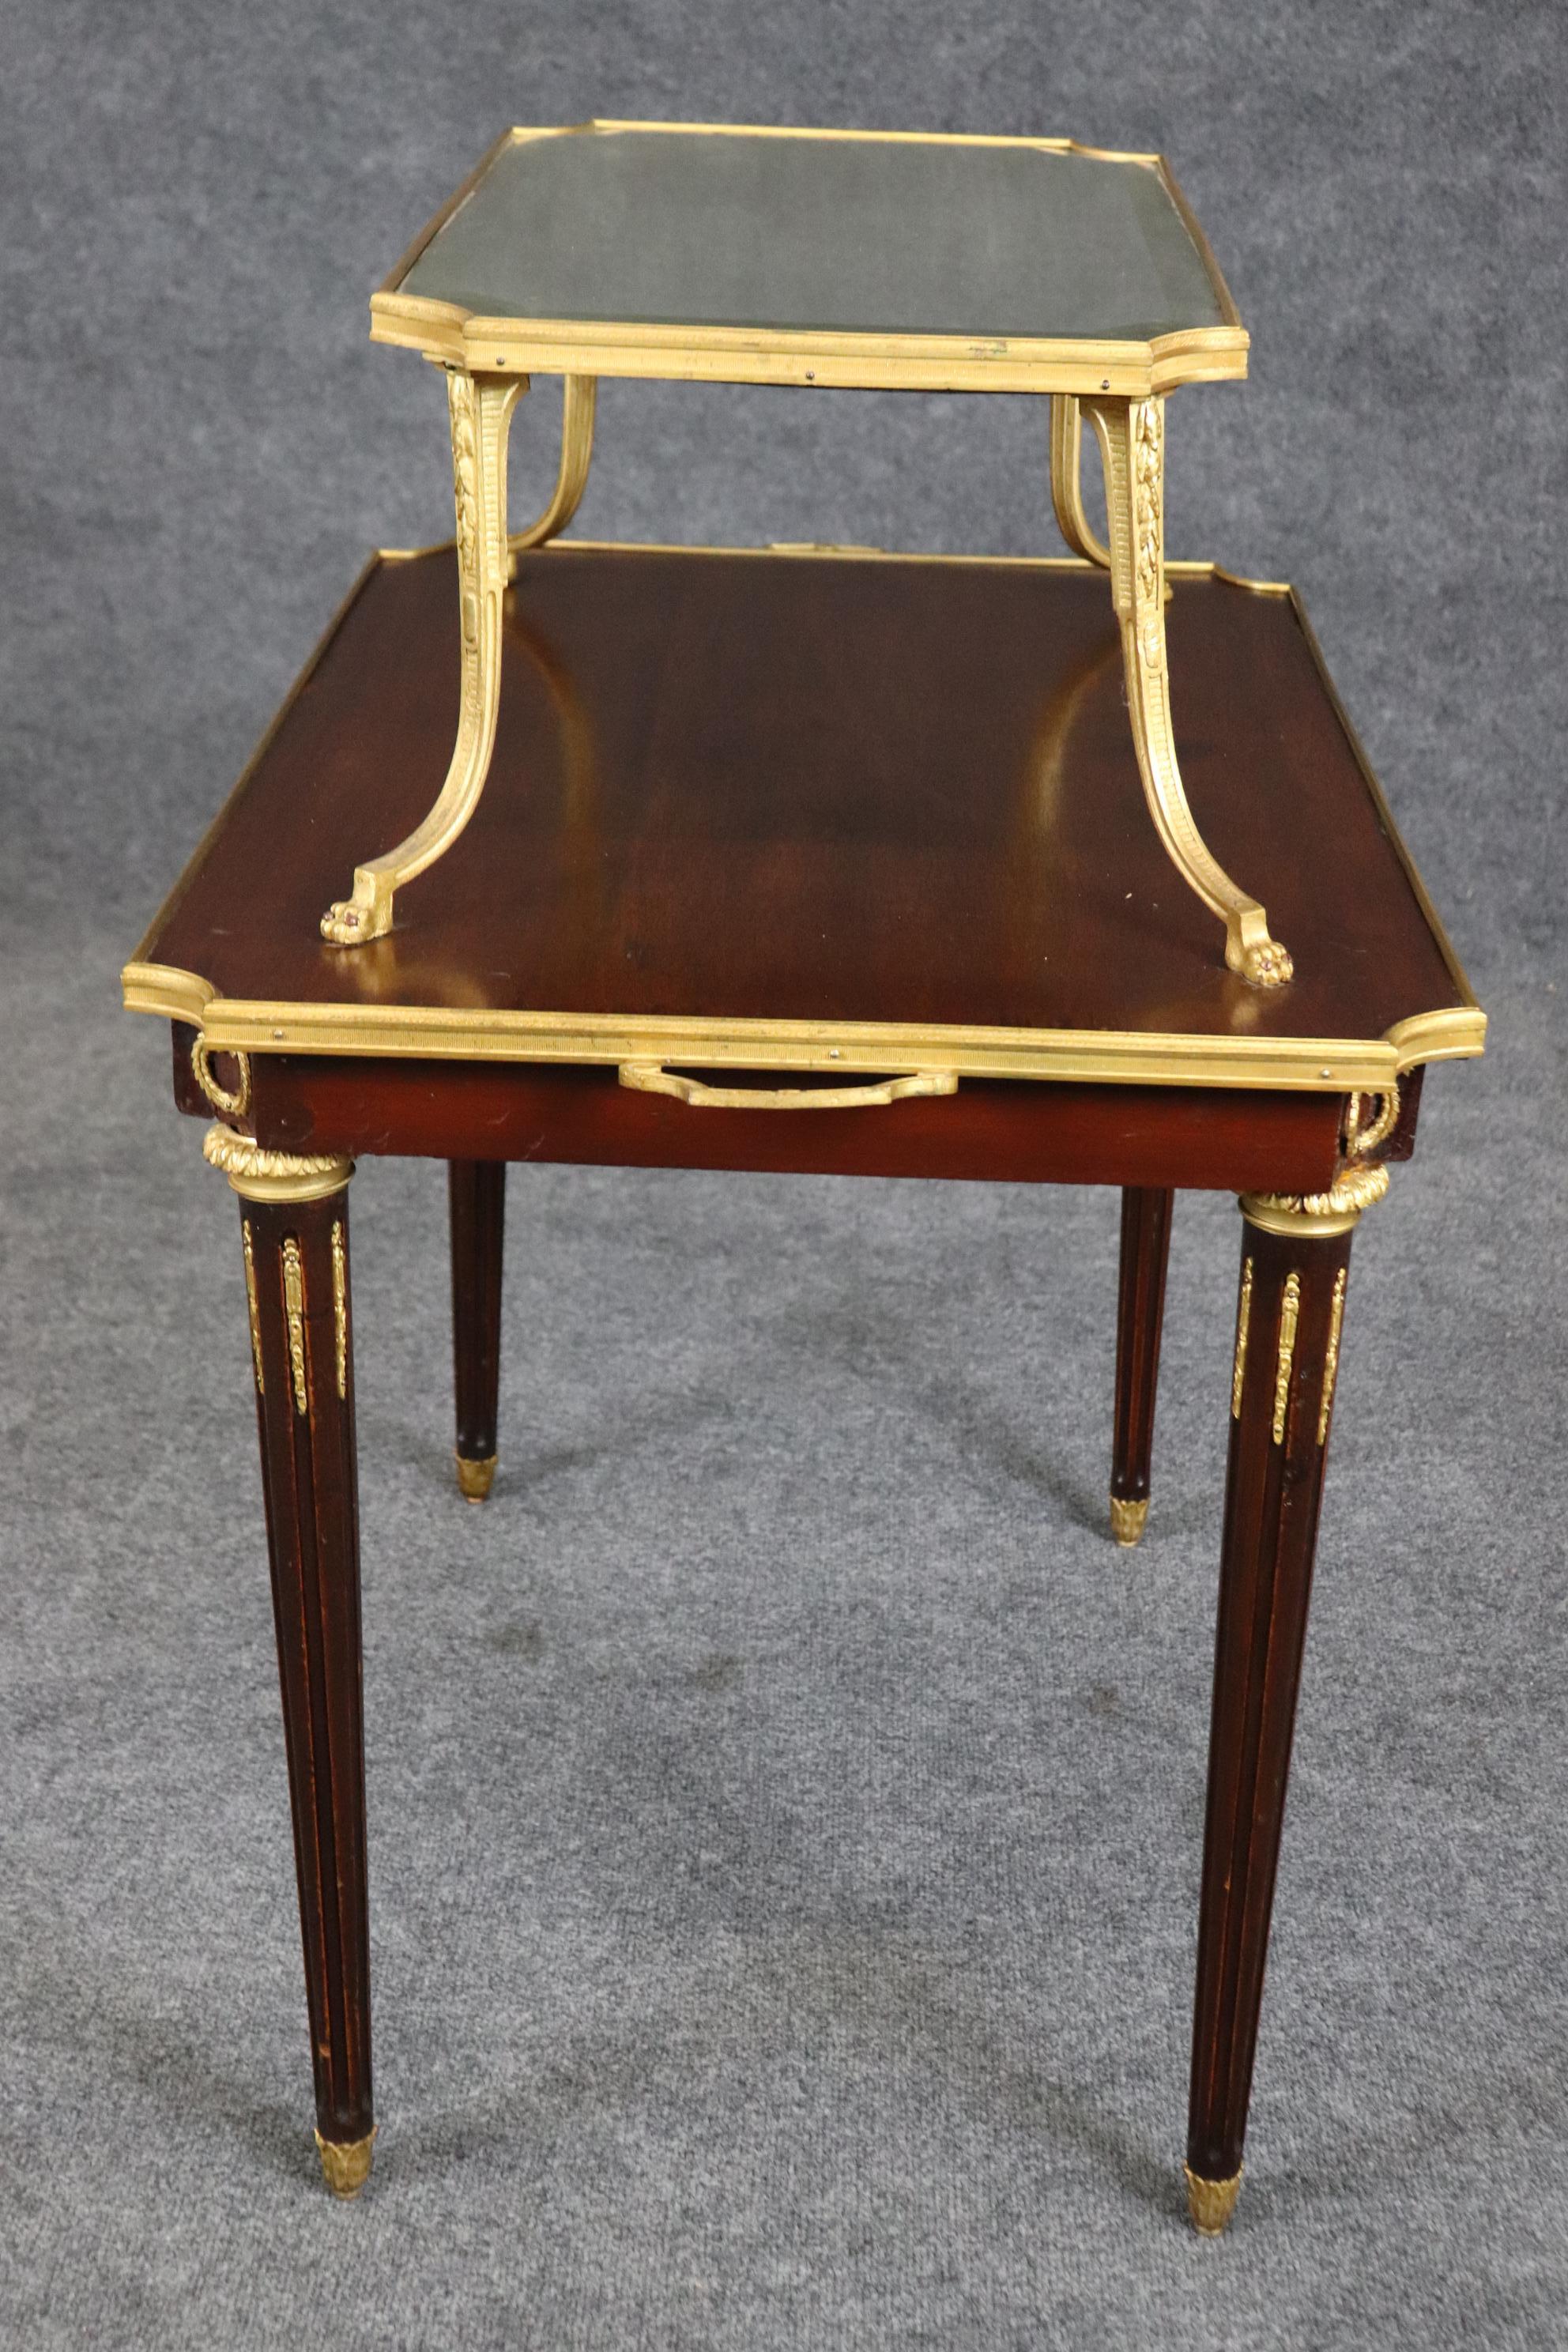 Fine Quality French Dore' Bronze and Mahogany Directoire Dessert Tray Top Table For Sale 5